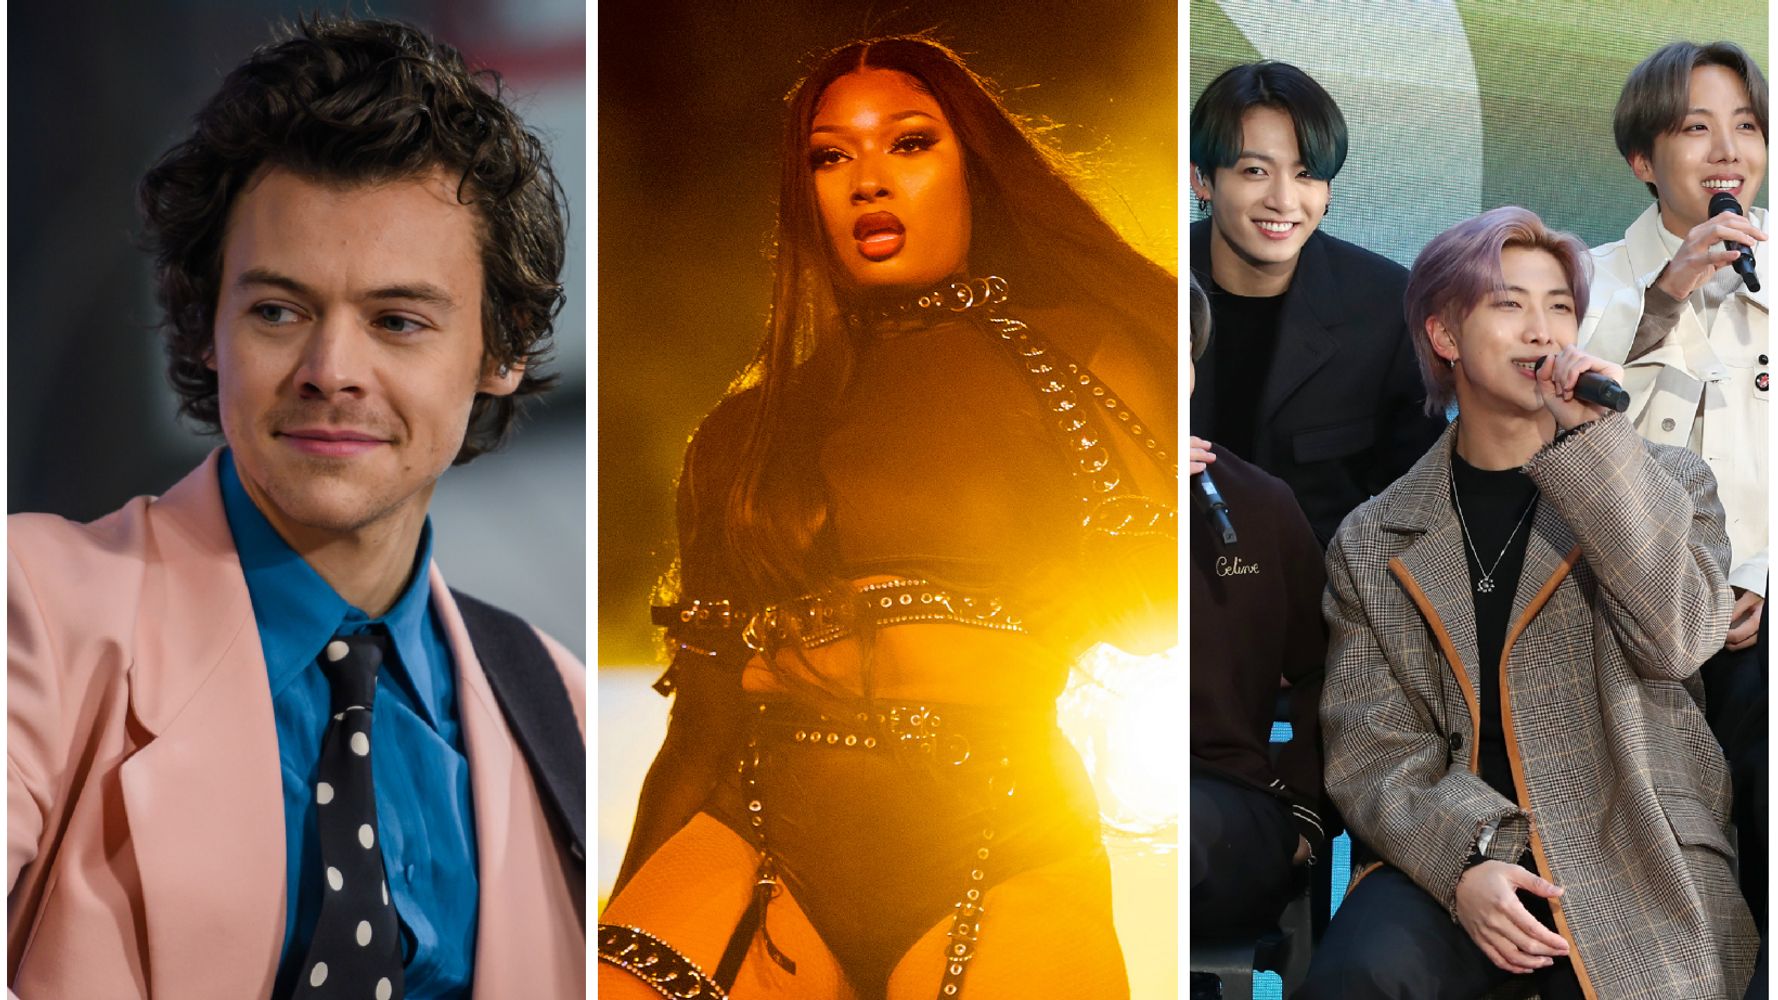 Harry Styles, Megan Thee Stallion, BTS: These Are The 2021 Grammy Nominations